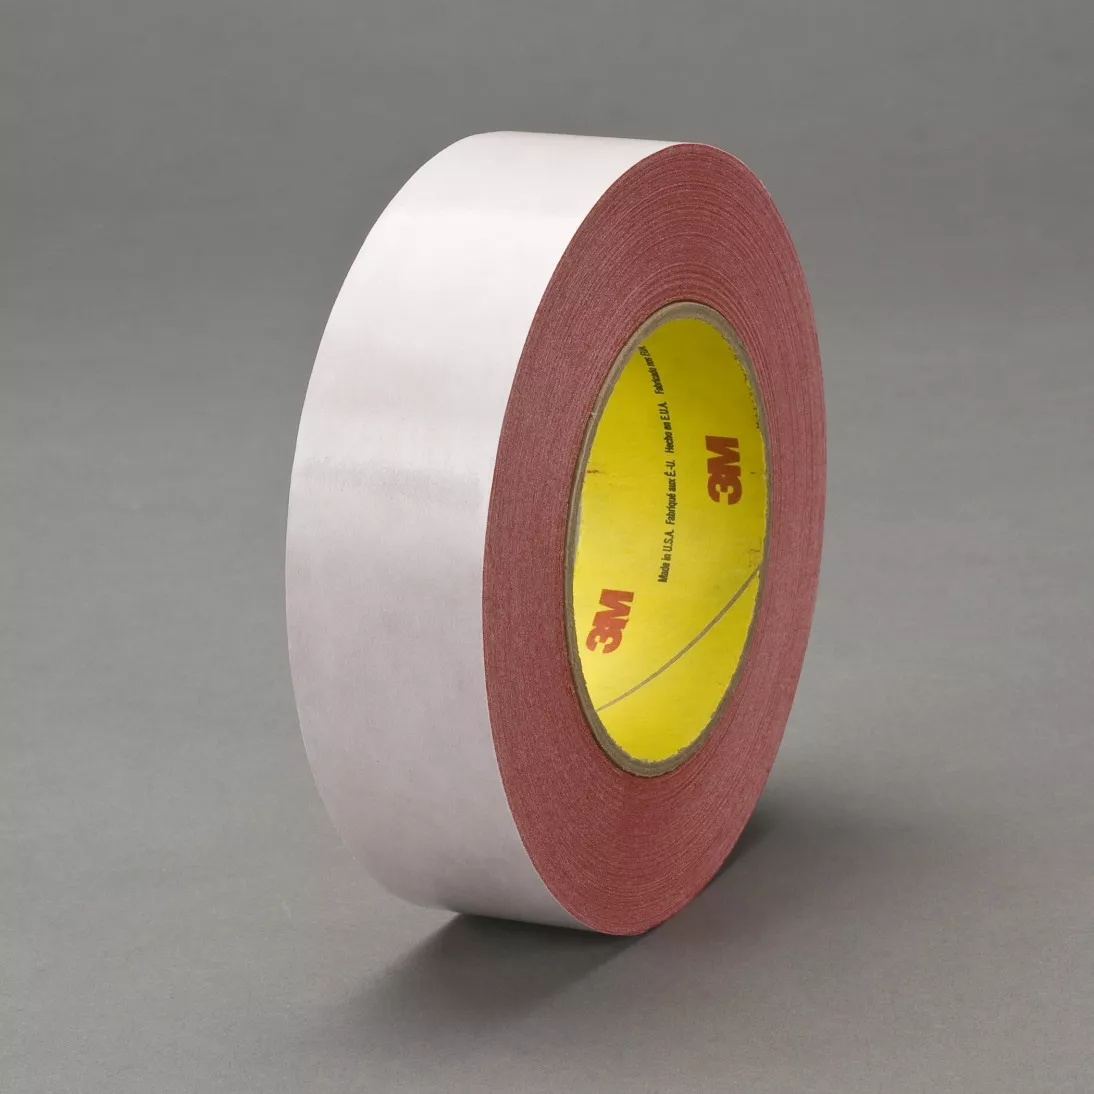 3M™ Double Coated Tape 9737R, Red, 60 in x 250 yd, 3.5 mil, 9 rolls per
pallet (1 roll per case)